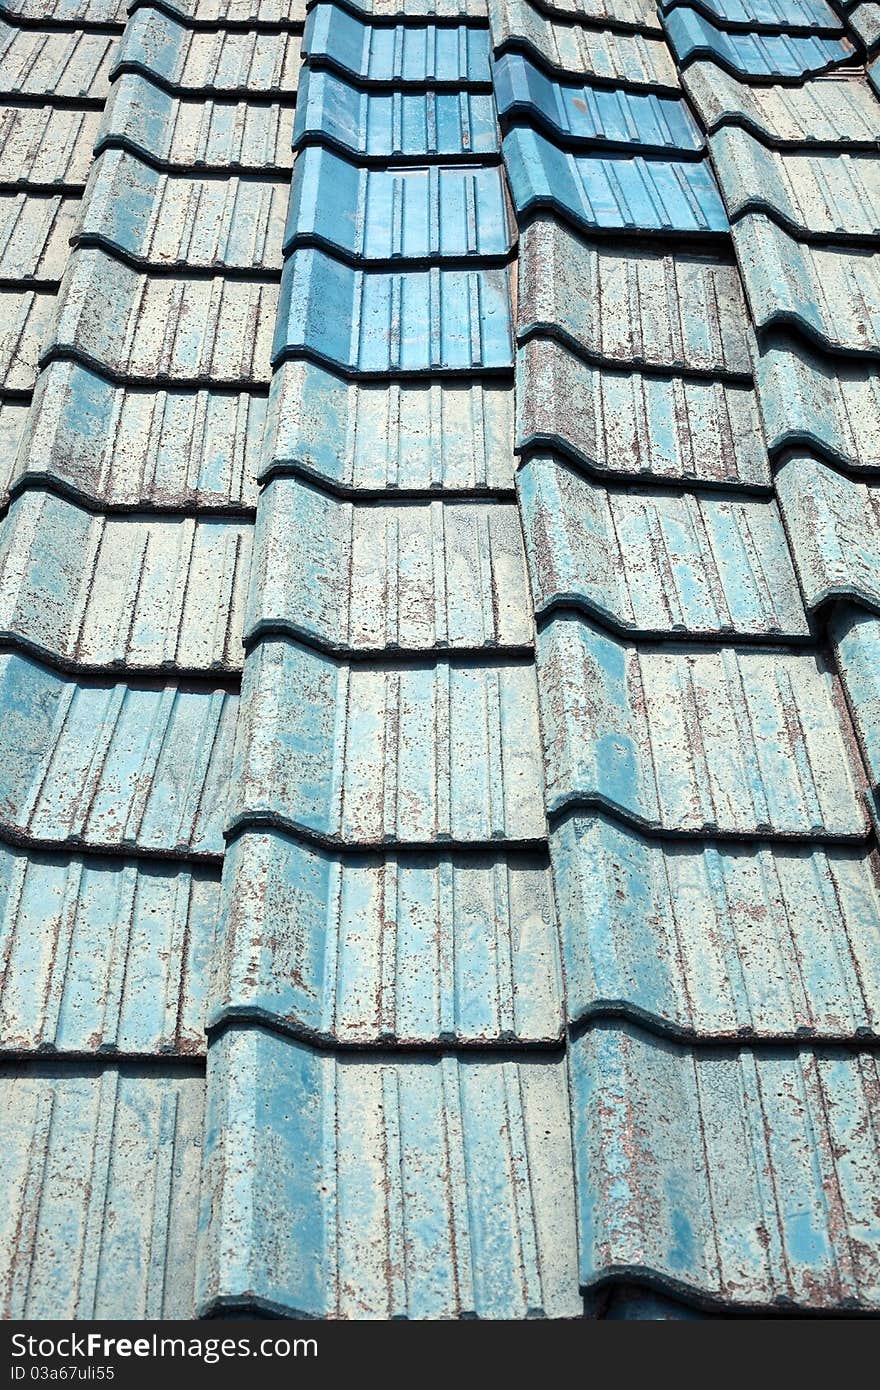 Olse up of old roof tiles